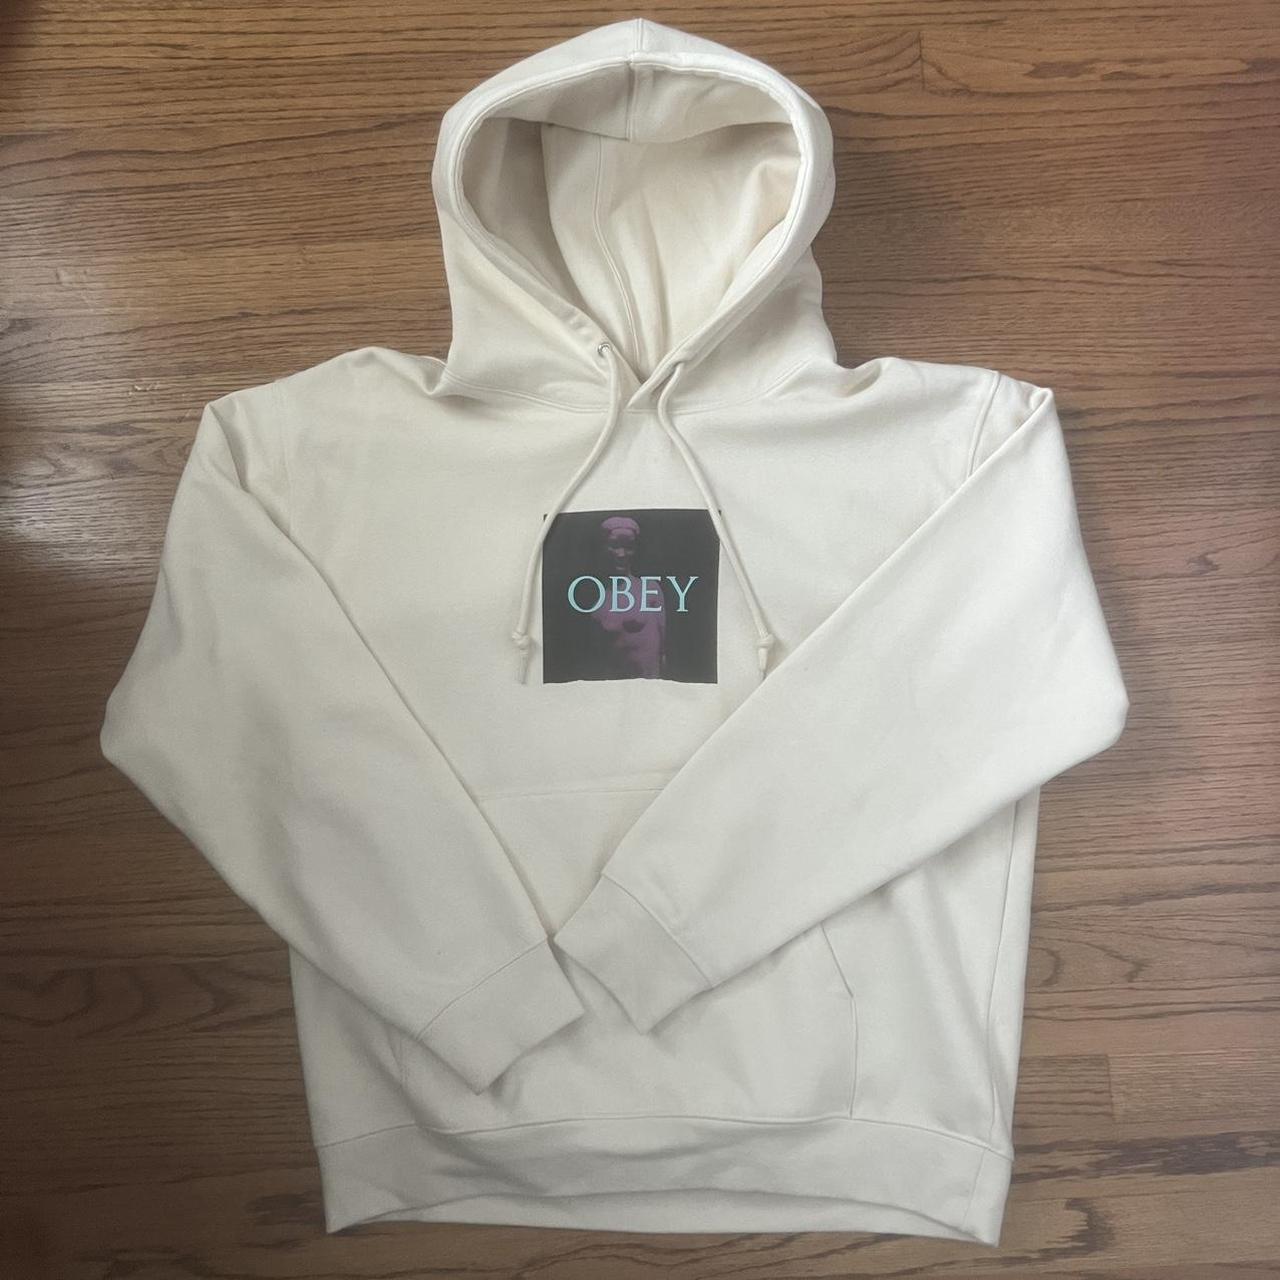 OBEY Soft Hoodie. Super Comfortable and Neutral. - Depop